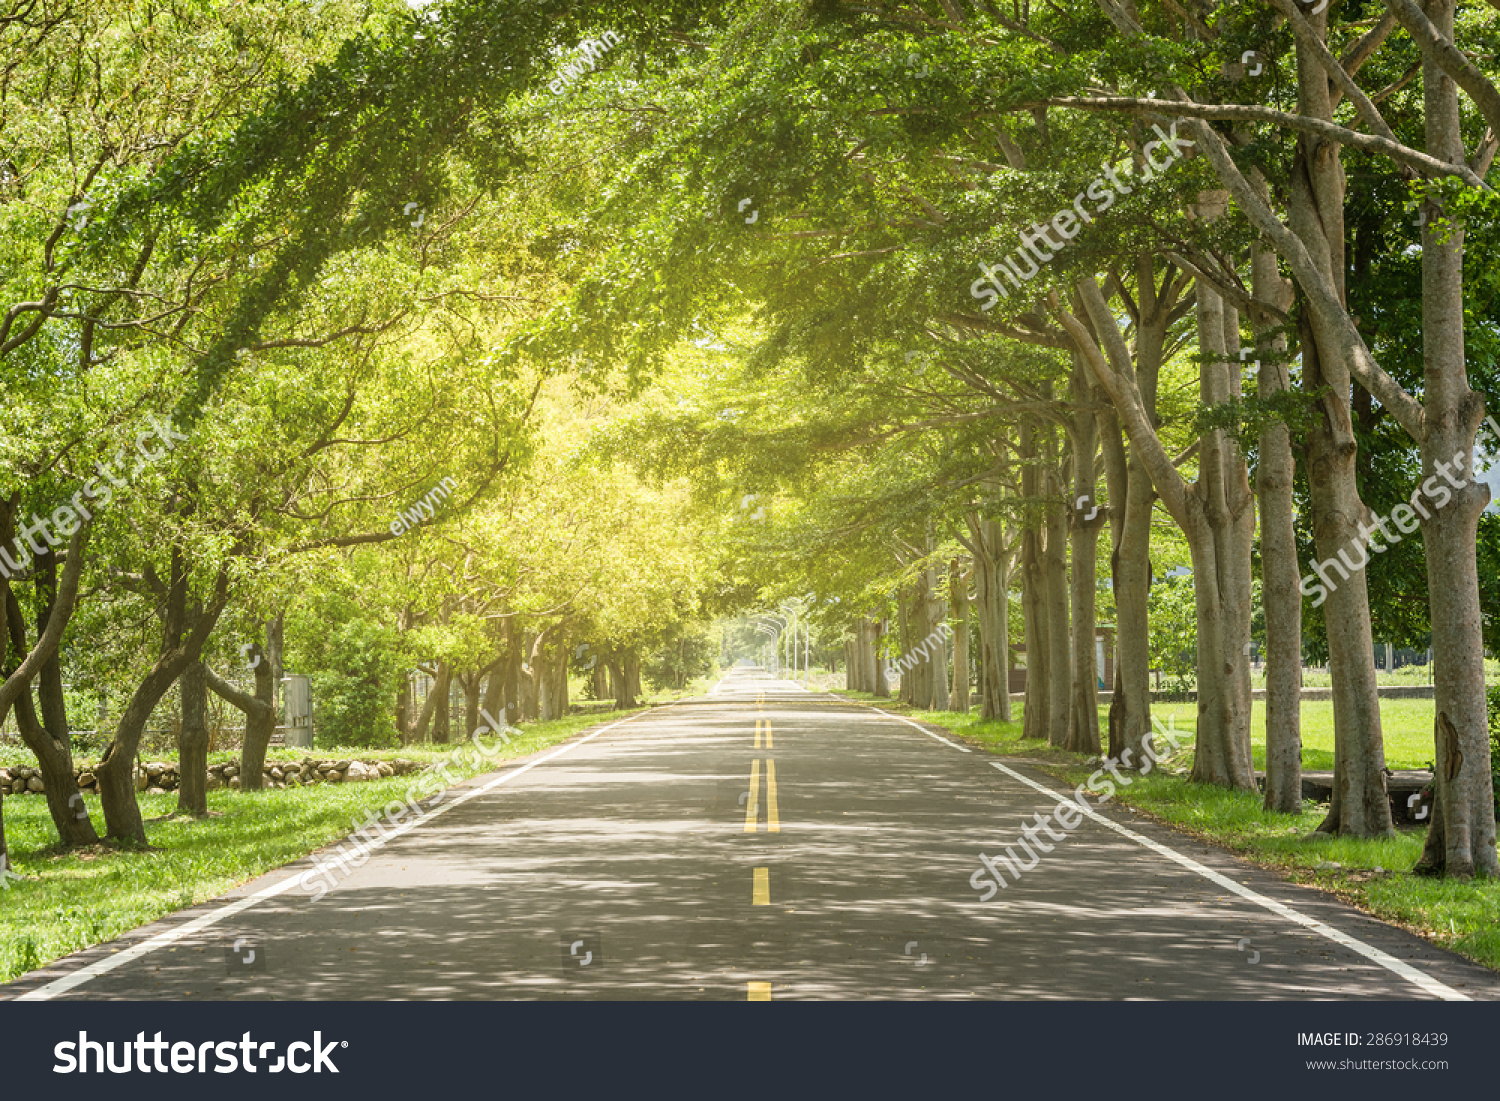 Landscape of straight road under the trees, the famous Longtien green tunnel in Taitung, Taiwan. #286918439